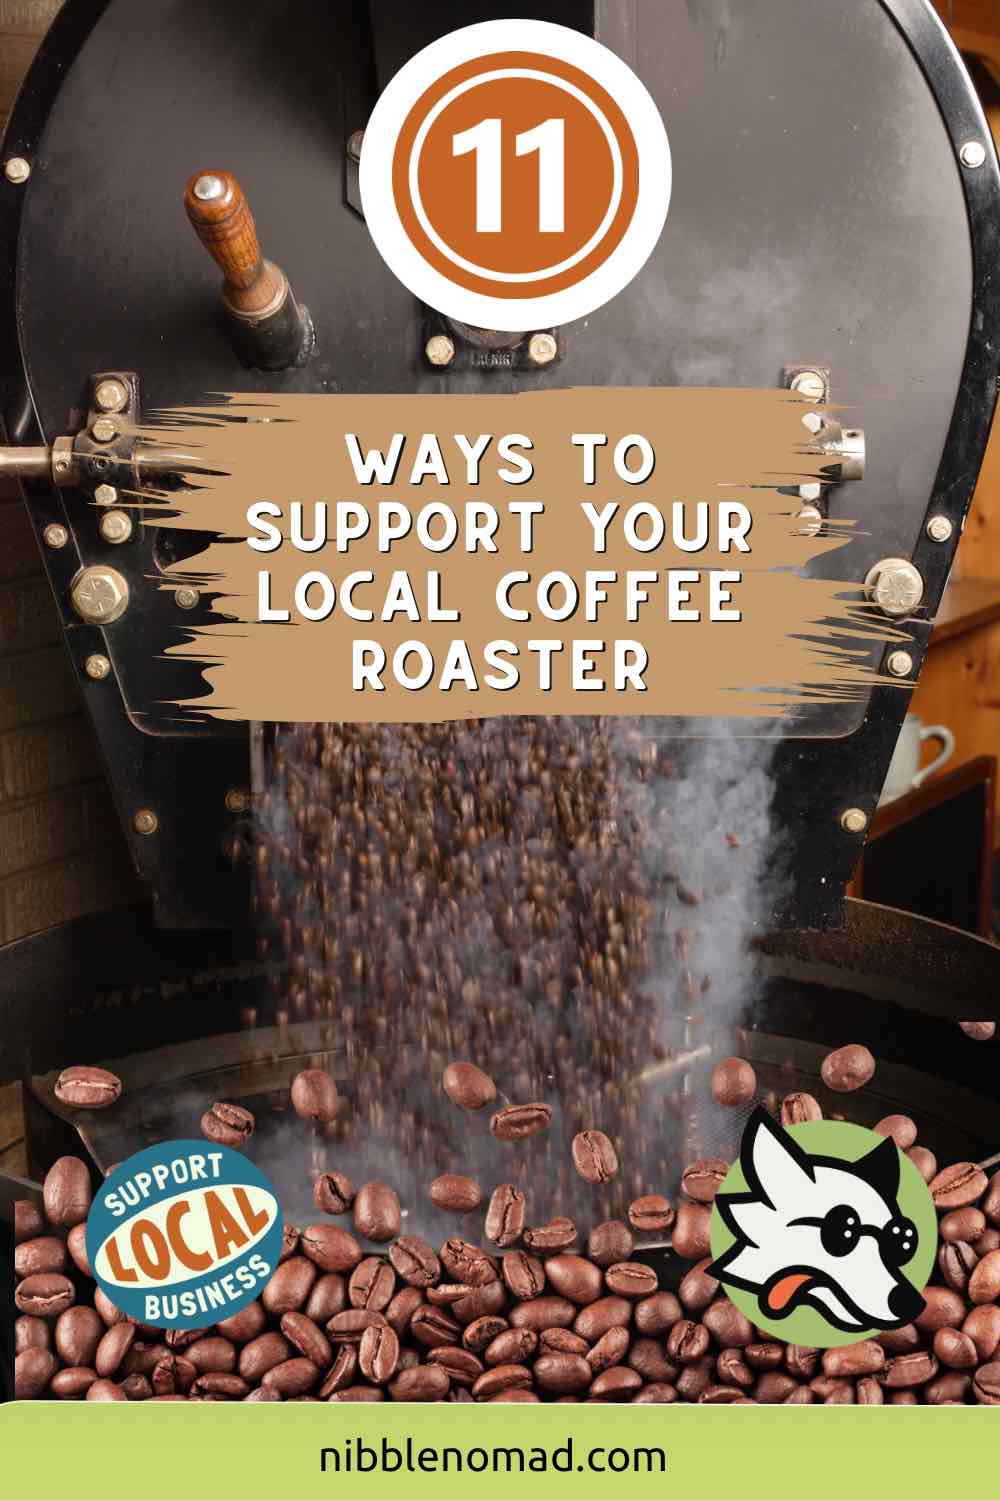 11 ways to support your local coffee roasters